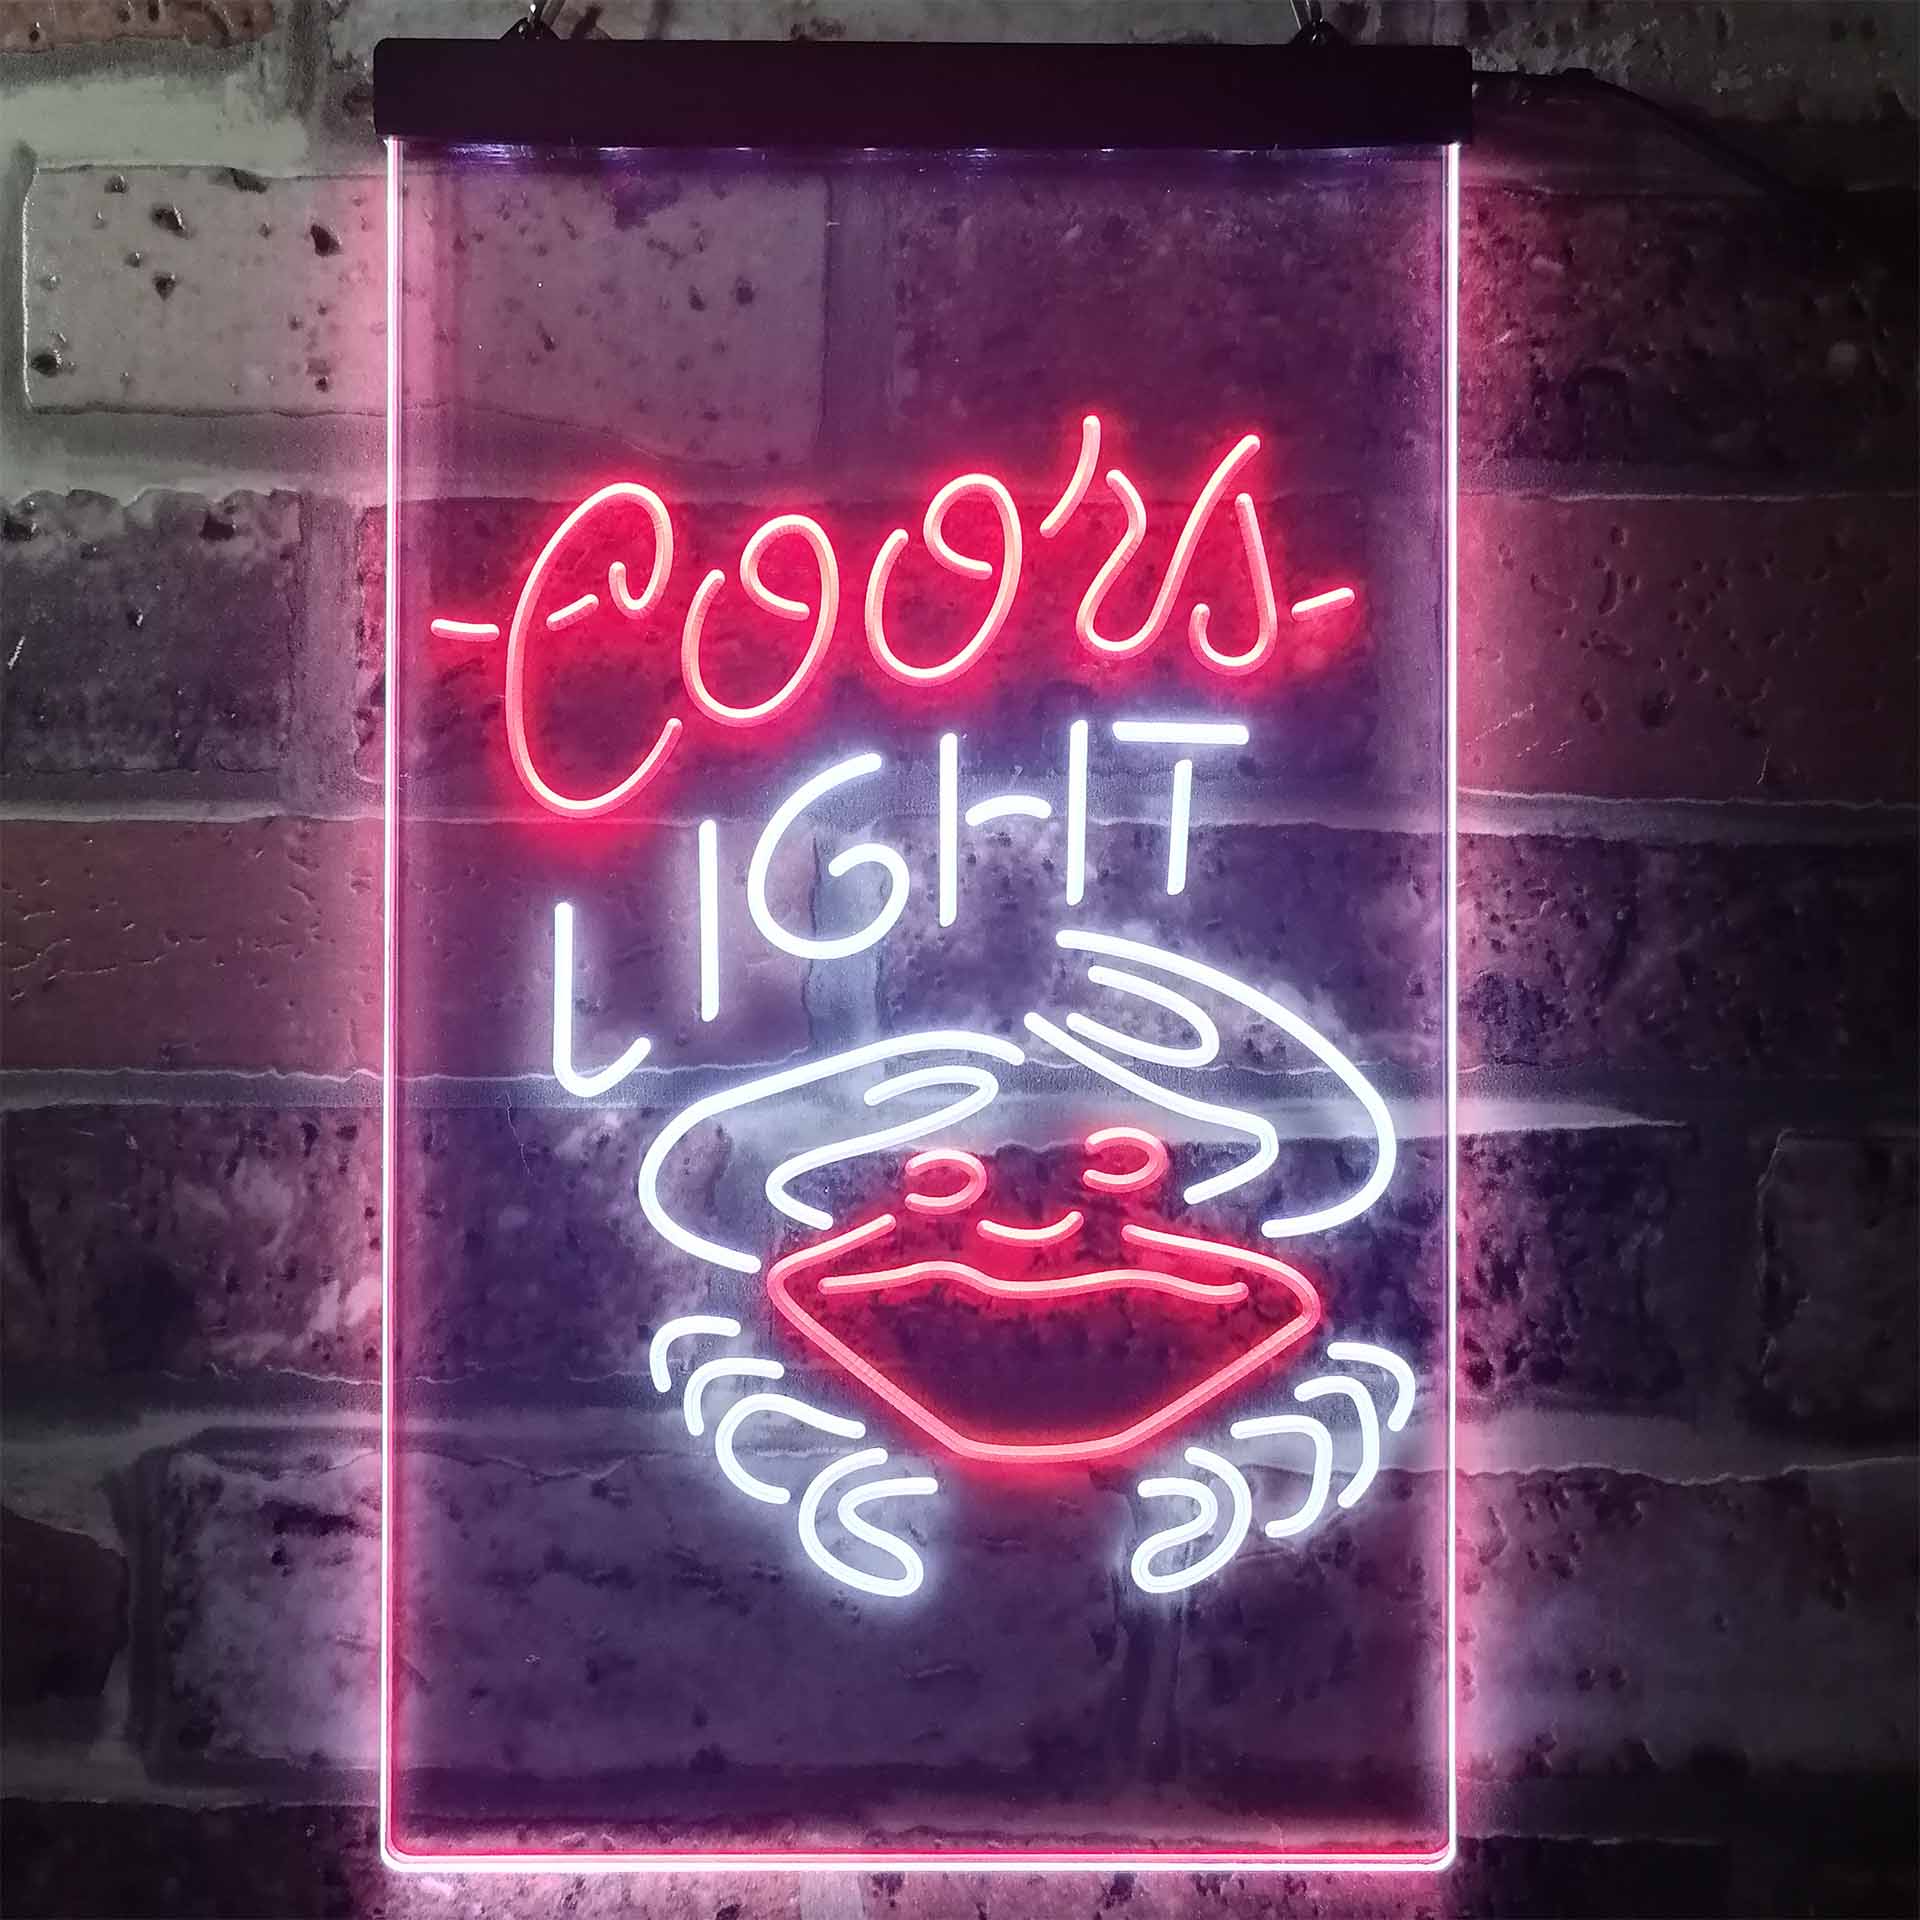 Coors Light Crab Bar LED Neon Sign